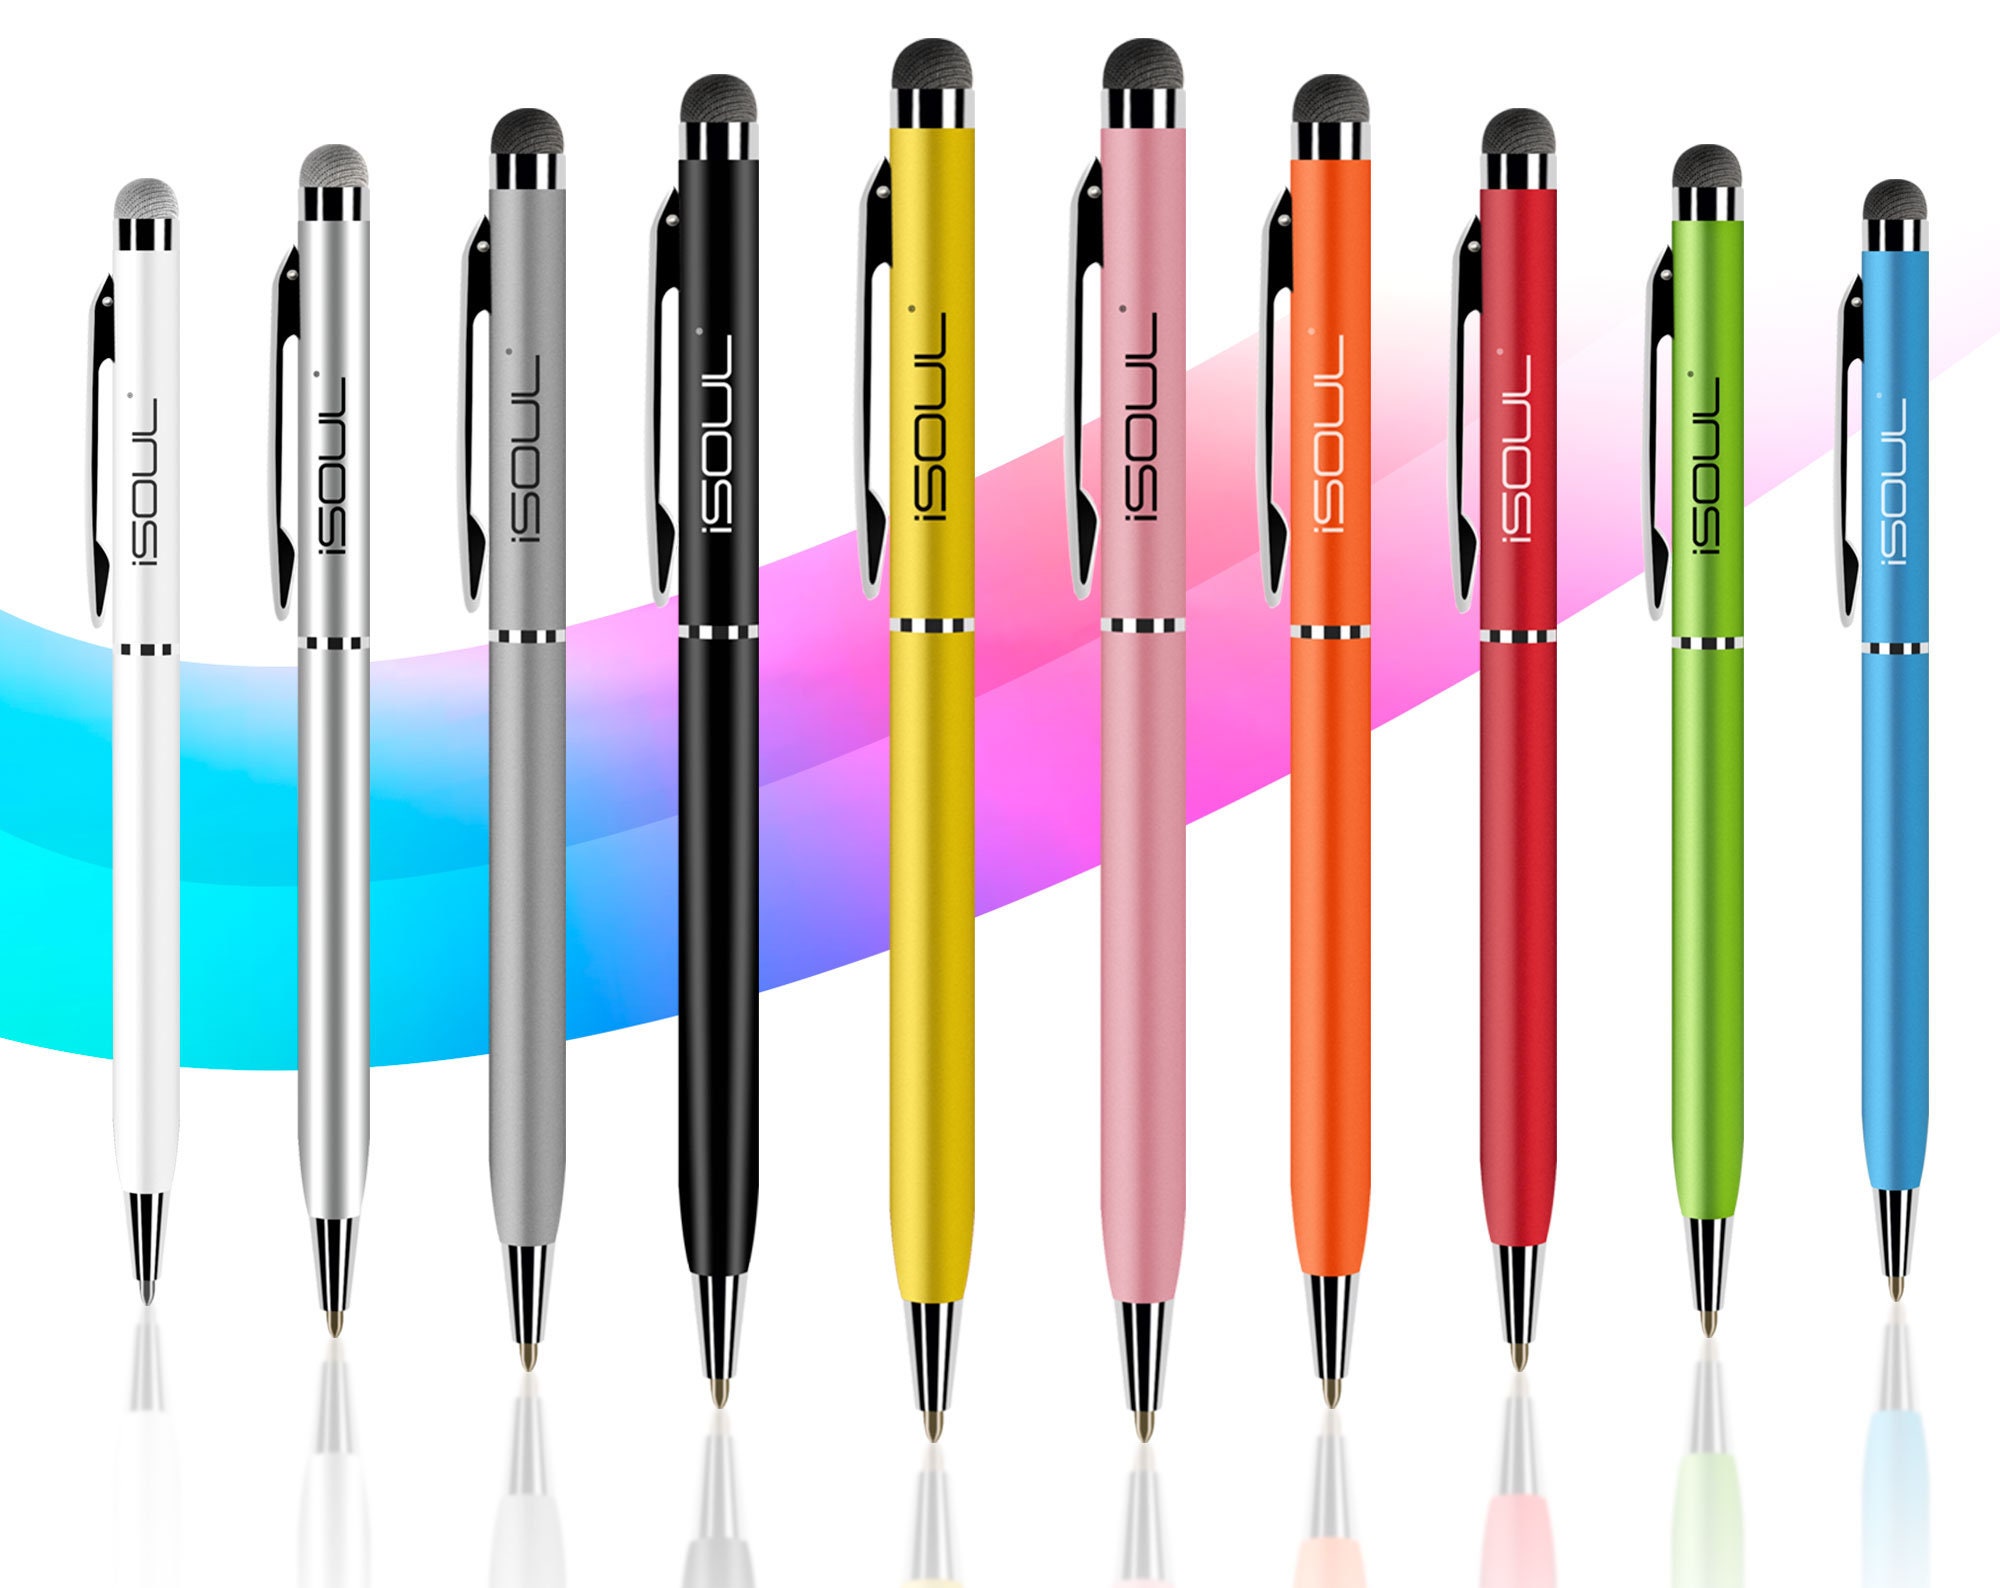 ORIbox Stylus Pens for Touch Screens,Stylus Pen for iPad,iPad Pro,iPad  Air,iPhone,Android,Tablet,Samsung,HTC,Fire Tablet,Stylus Pencil,All  Capacitive